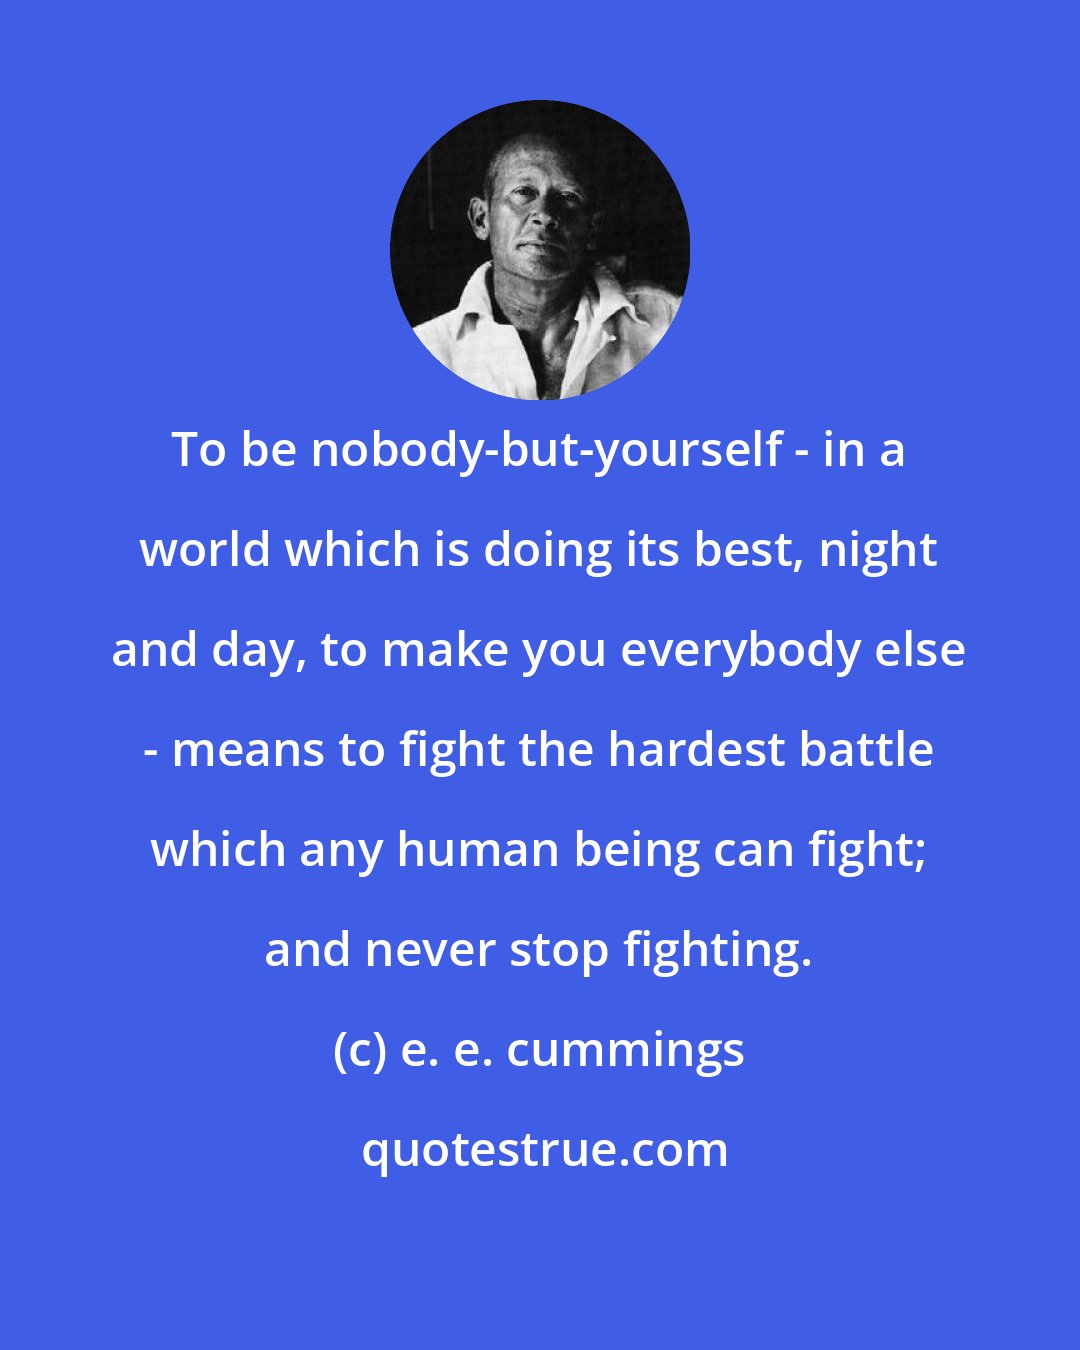 e. e. cummings: To be nobody-but-yourself - in a world which is doing its best, night and day, to make you everybody else - means to fight the hardest battle which any human being can fight; and never stop fighting.